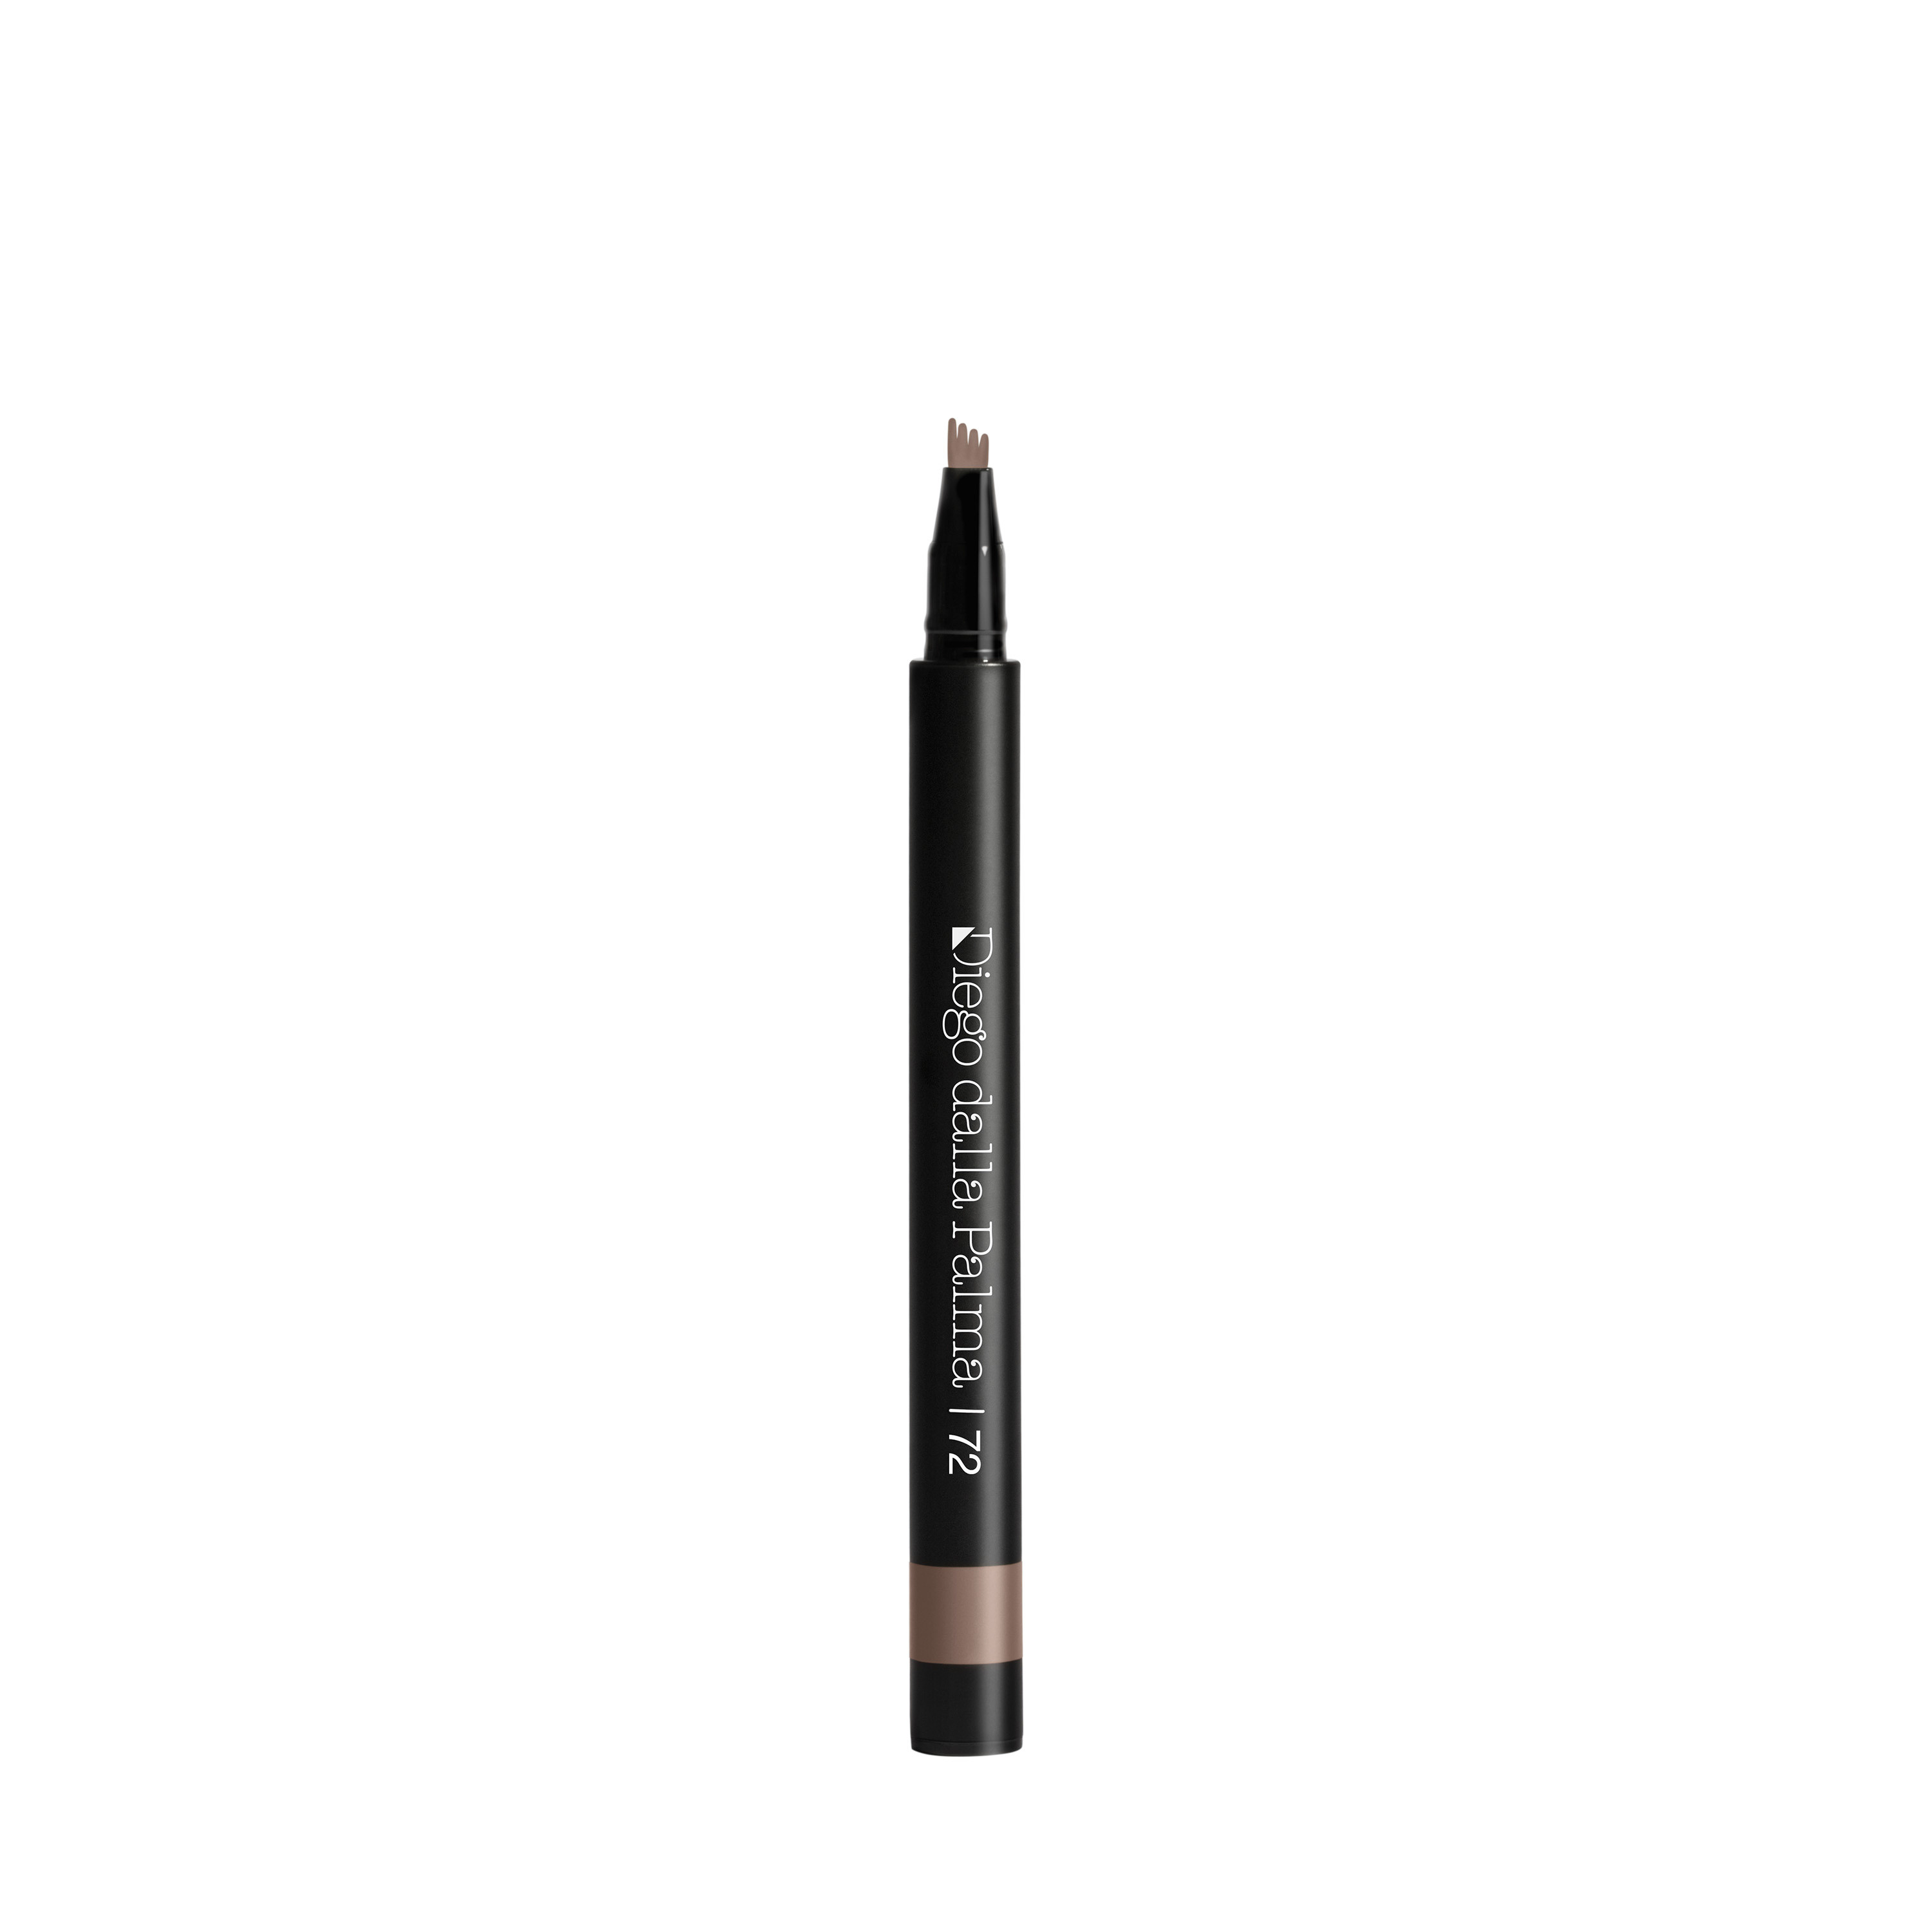 Eyebrow Pen Long Lasting Microblading Effect 24H - 72 dove grey, Dove Grey, large image number 0